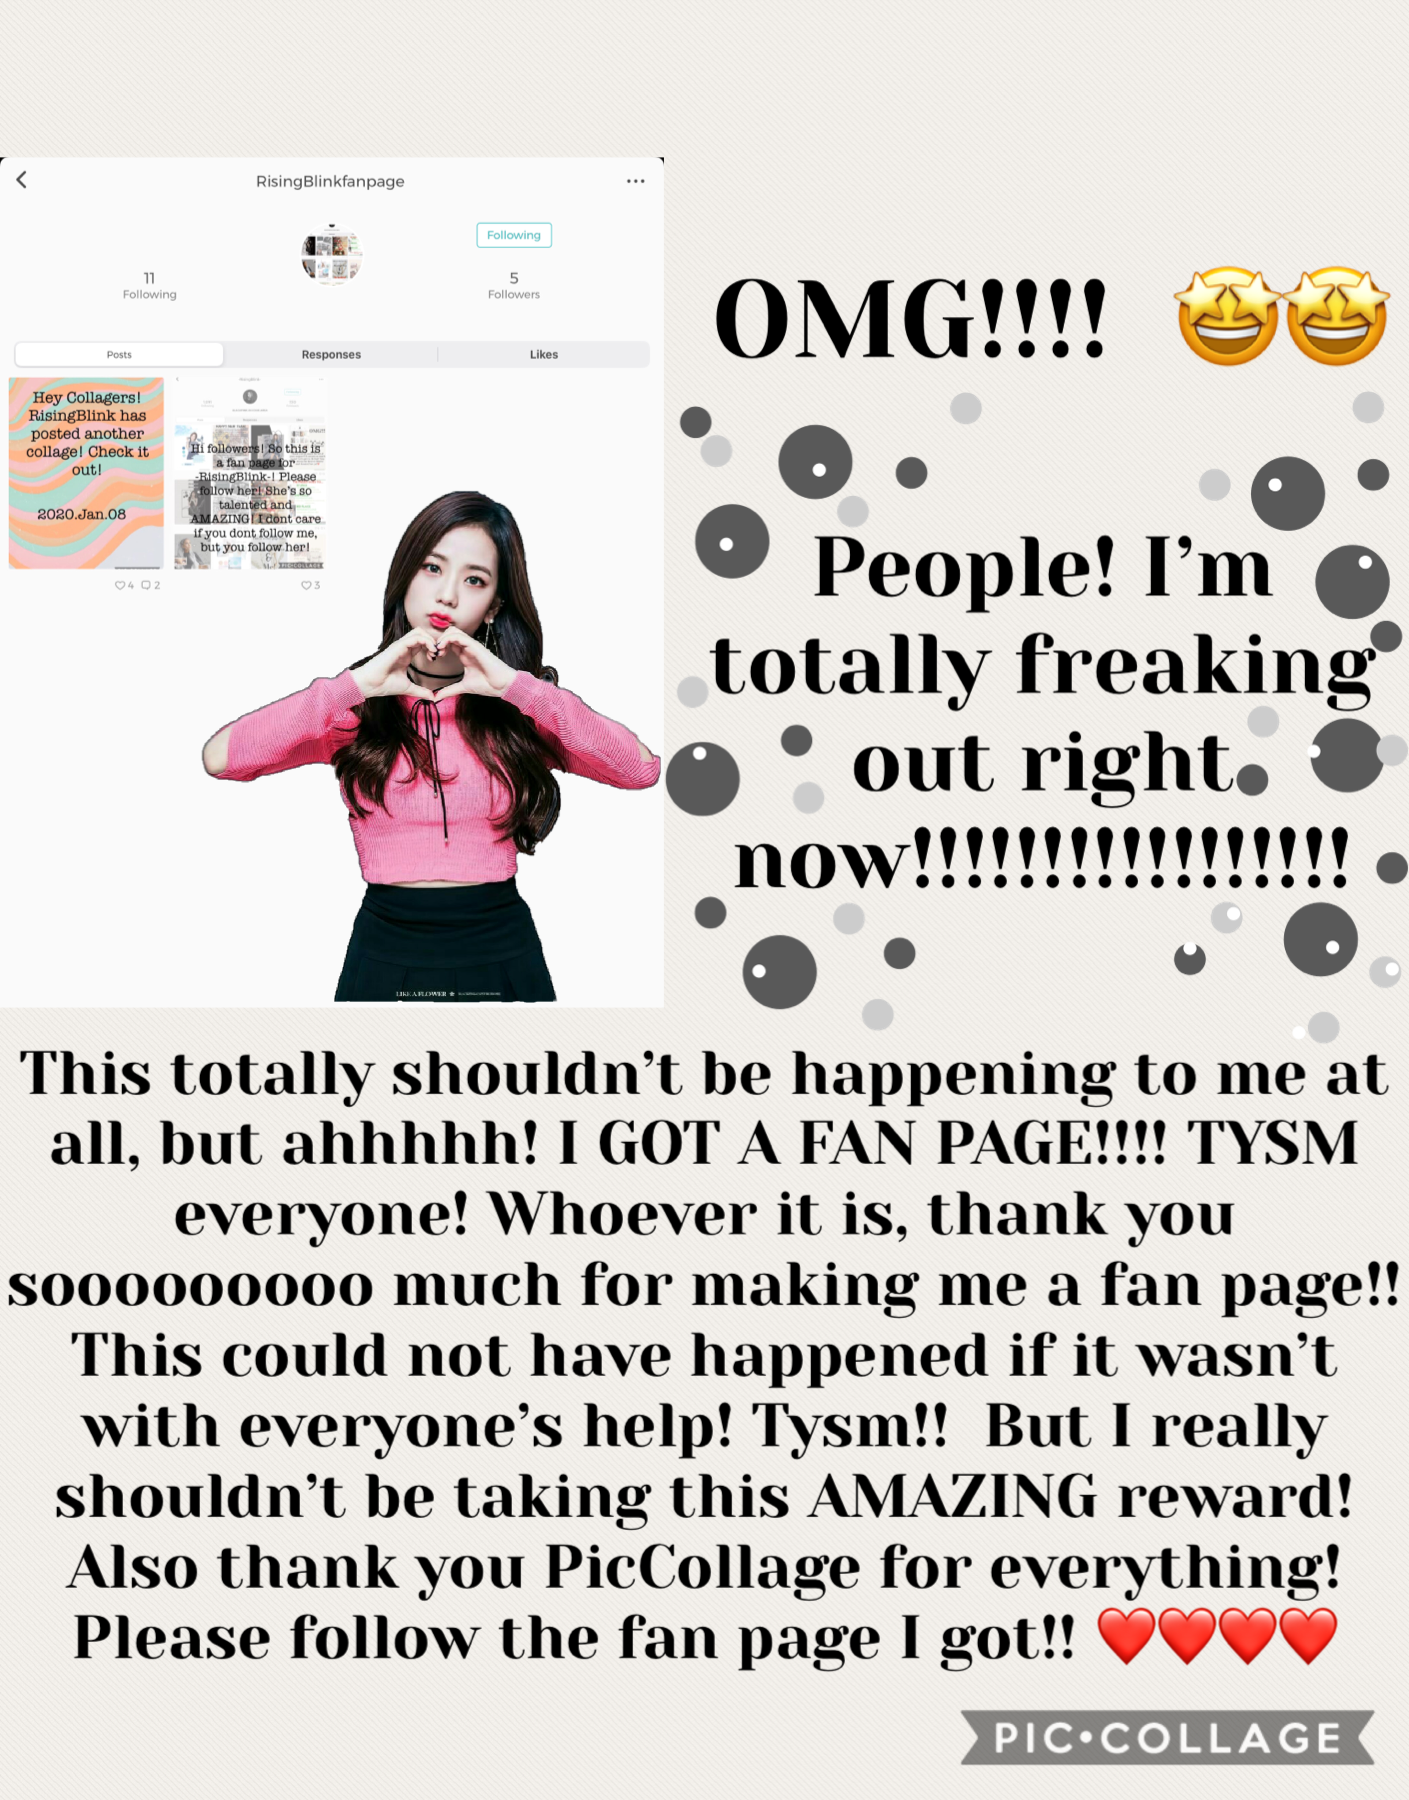 💗TAP💗

AHHHHHH!!!!! 
IM TOO FREAKED OUT TO TALK!
THANK YOU SO MUCH! 
ALSO THANK YOU SO MUCH TO MY BESTIE SPARKLYDIAMONDS FOR TELLING ME THIS! 